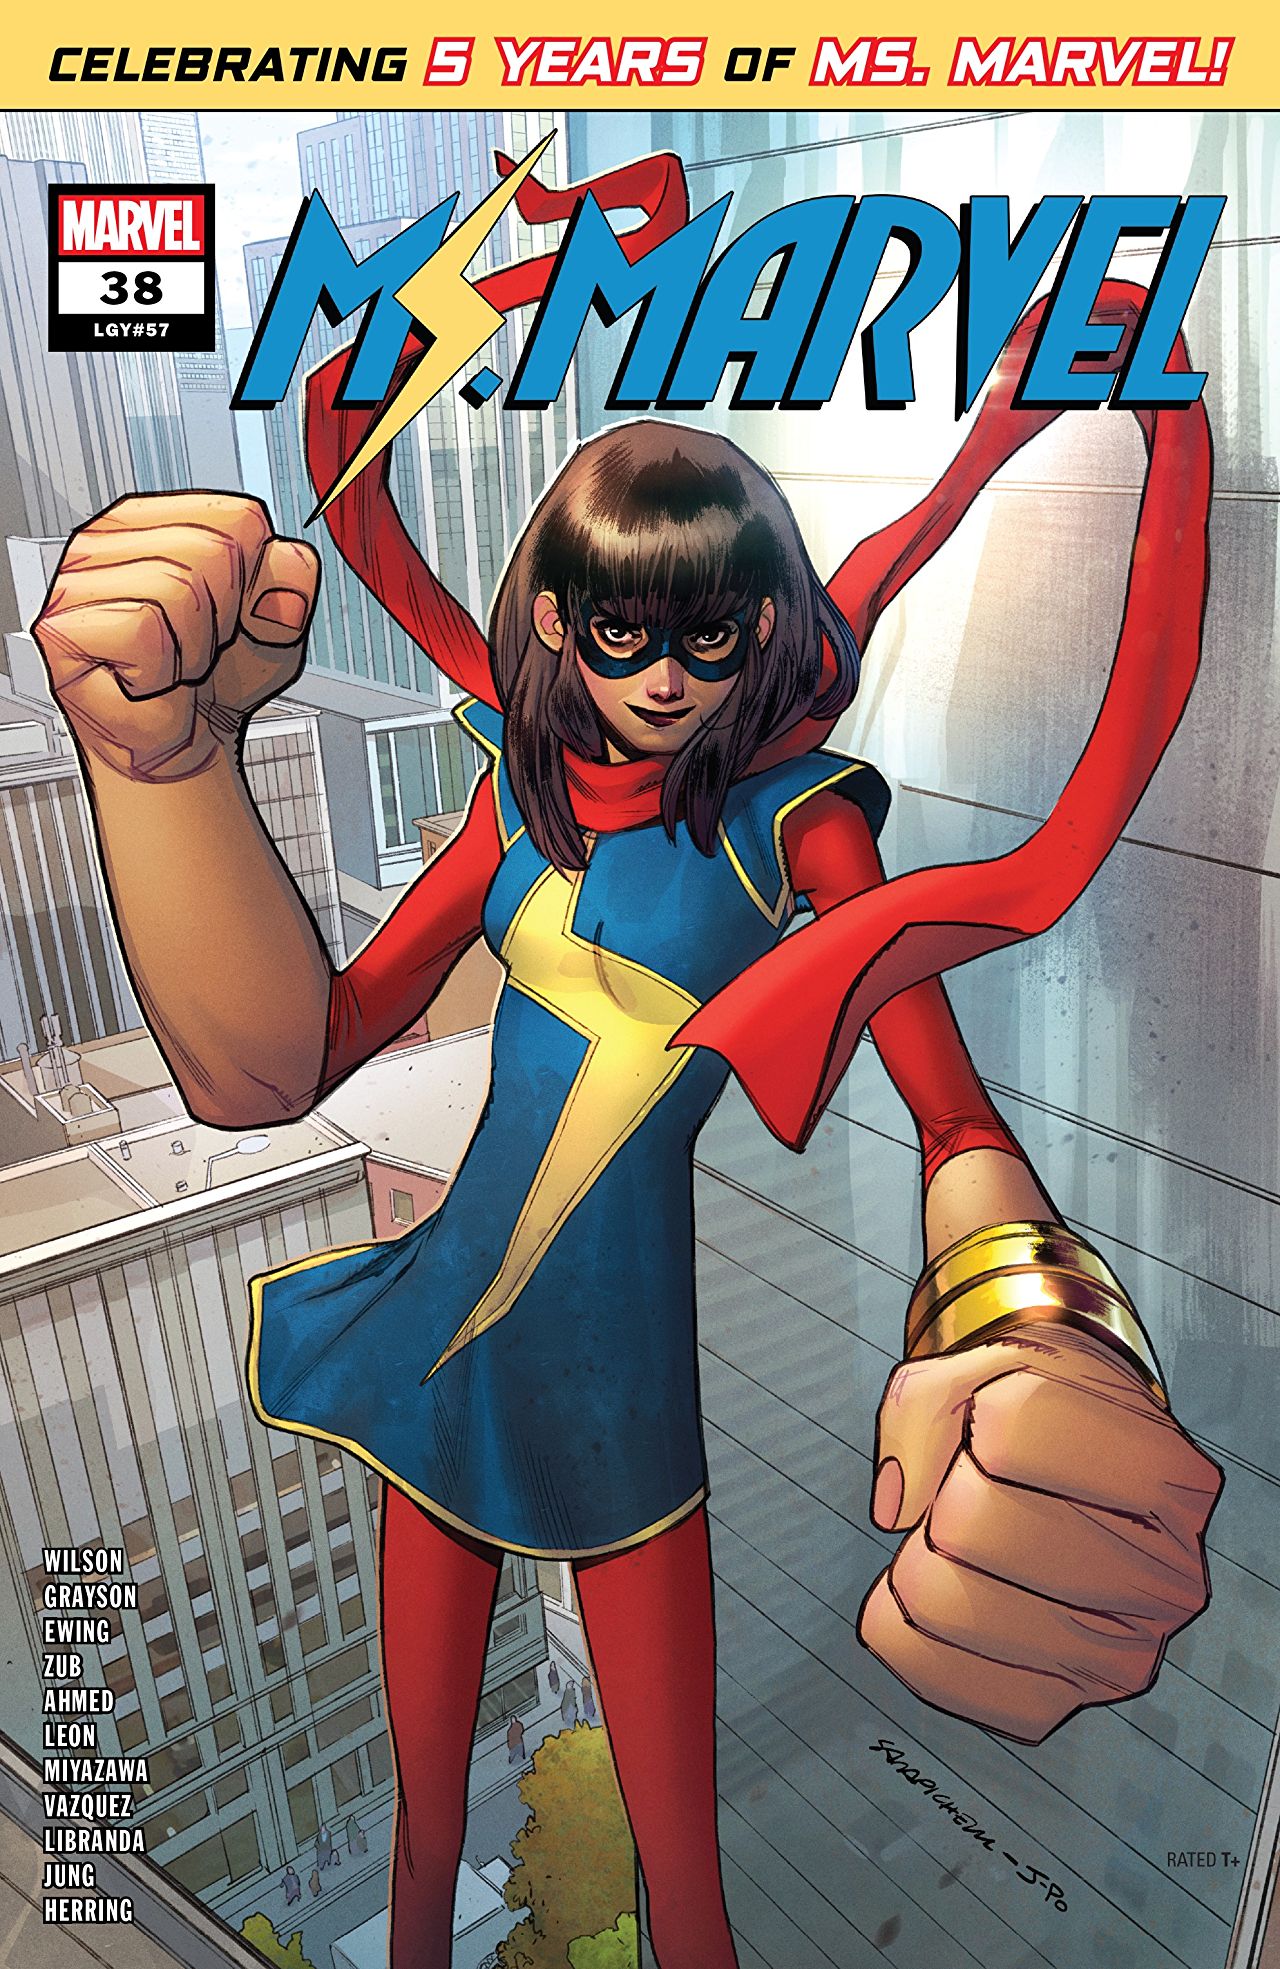 Ms. Marvel #38 [co-writer]. Cover art by Sara Pichelli. 